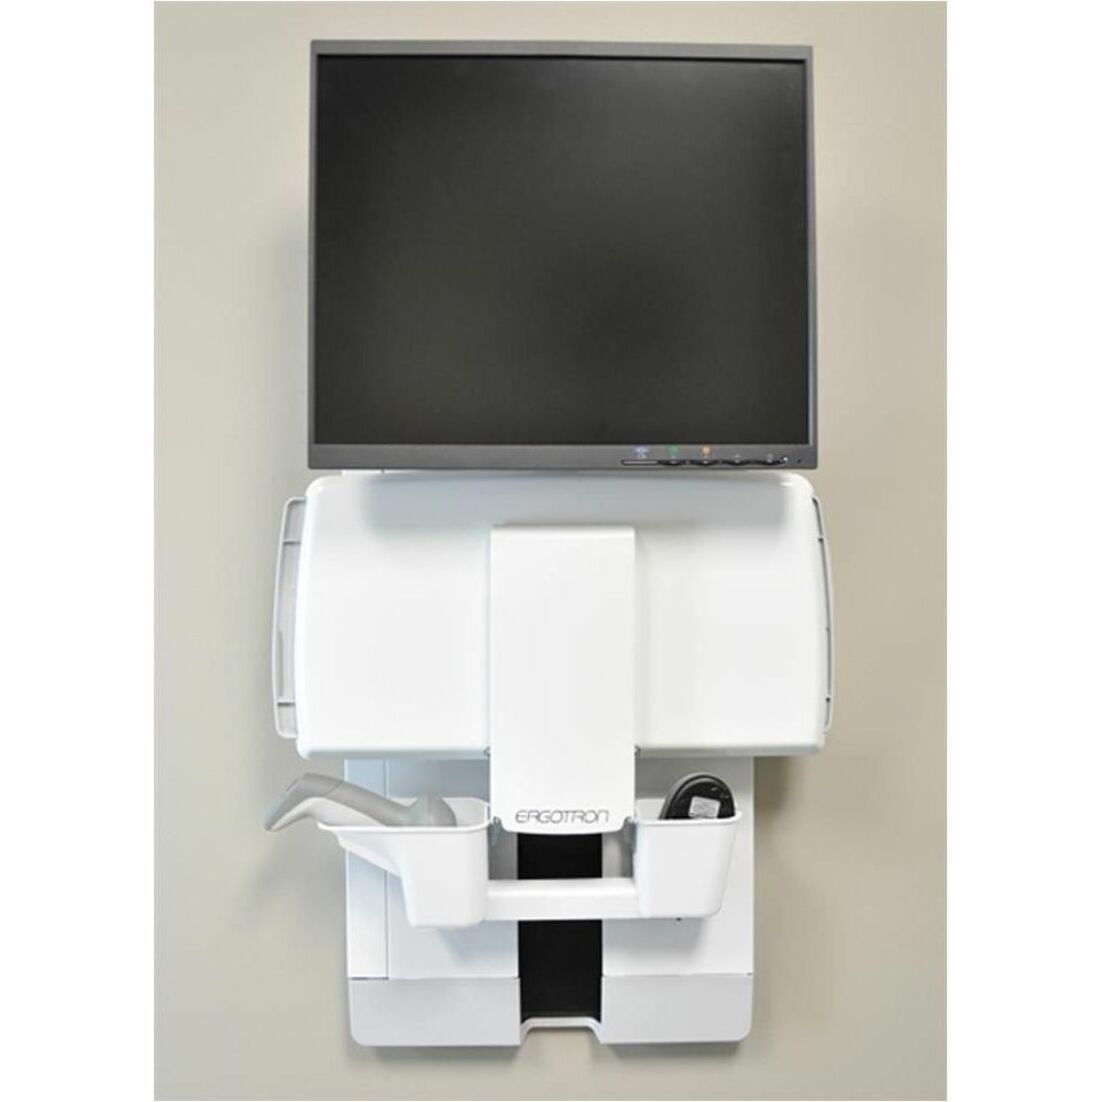 Ergotron 60-609-216 StyleView Vertical Lift, 9" VL with Keyboard and Scanner Holder